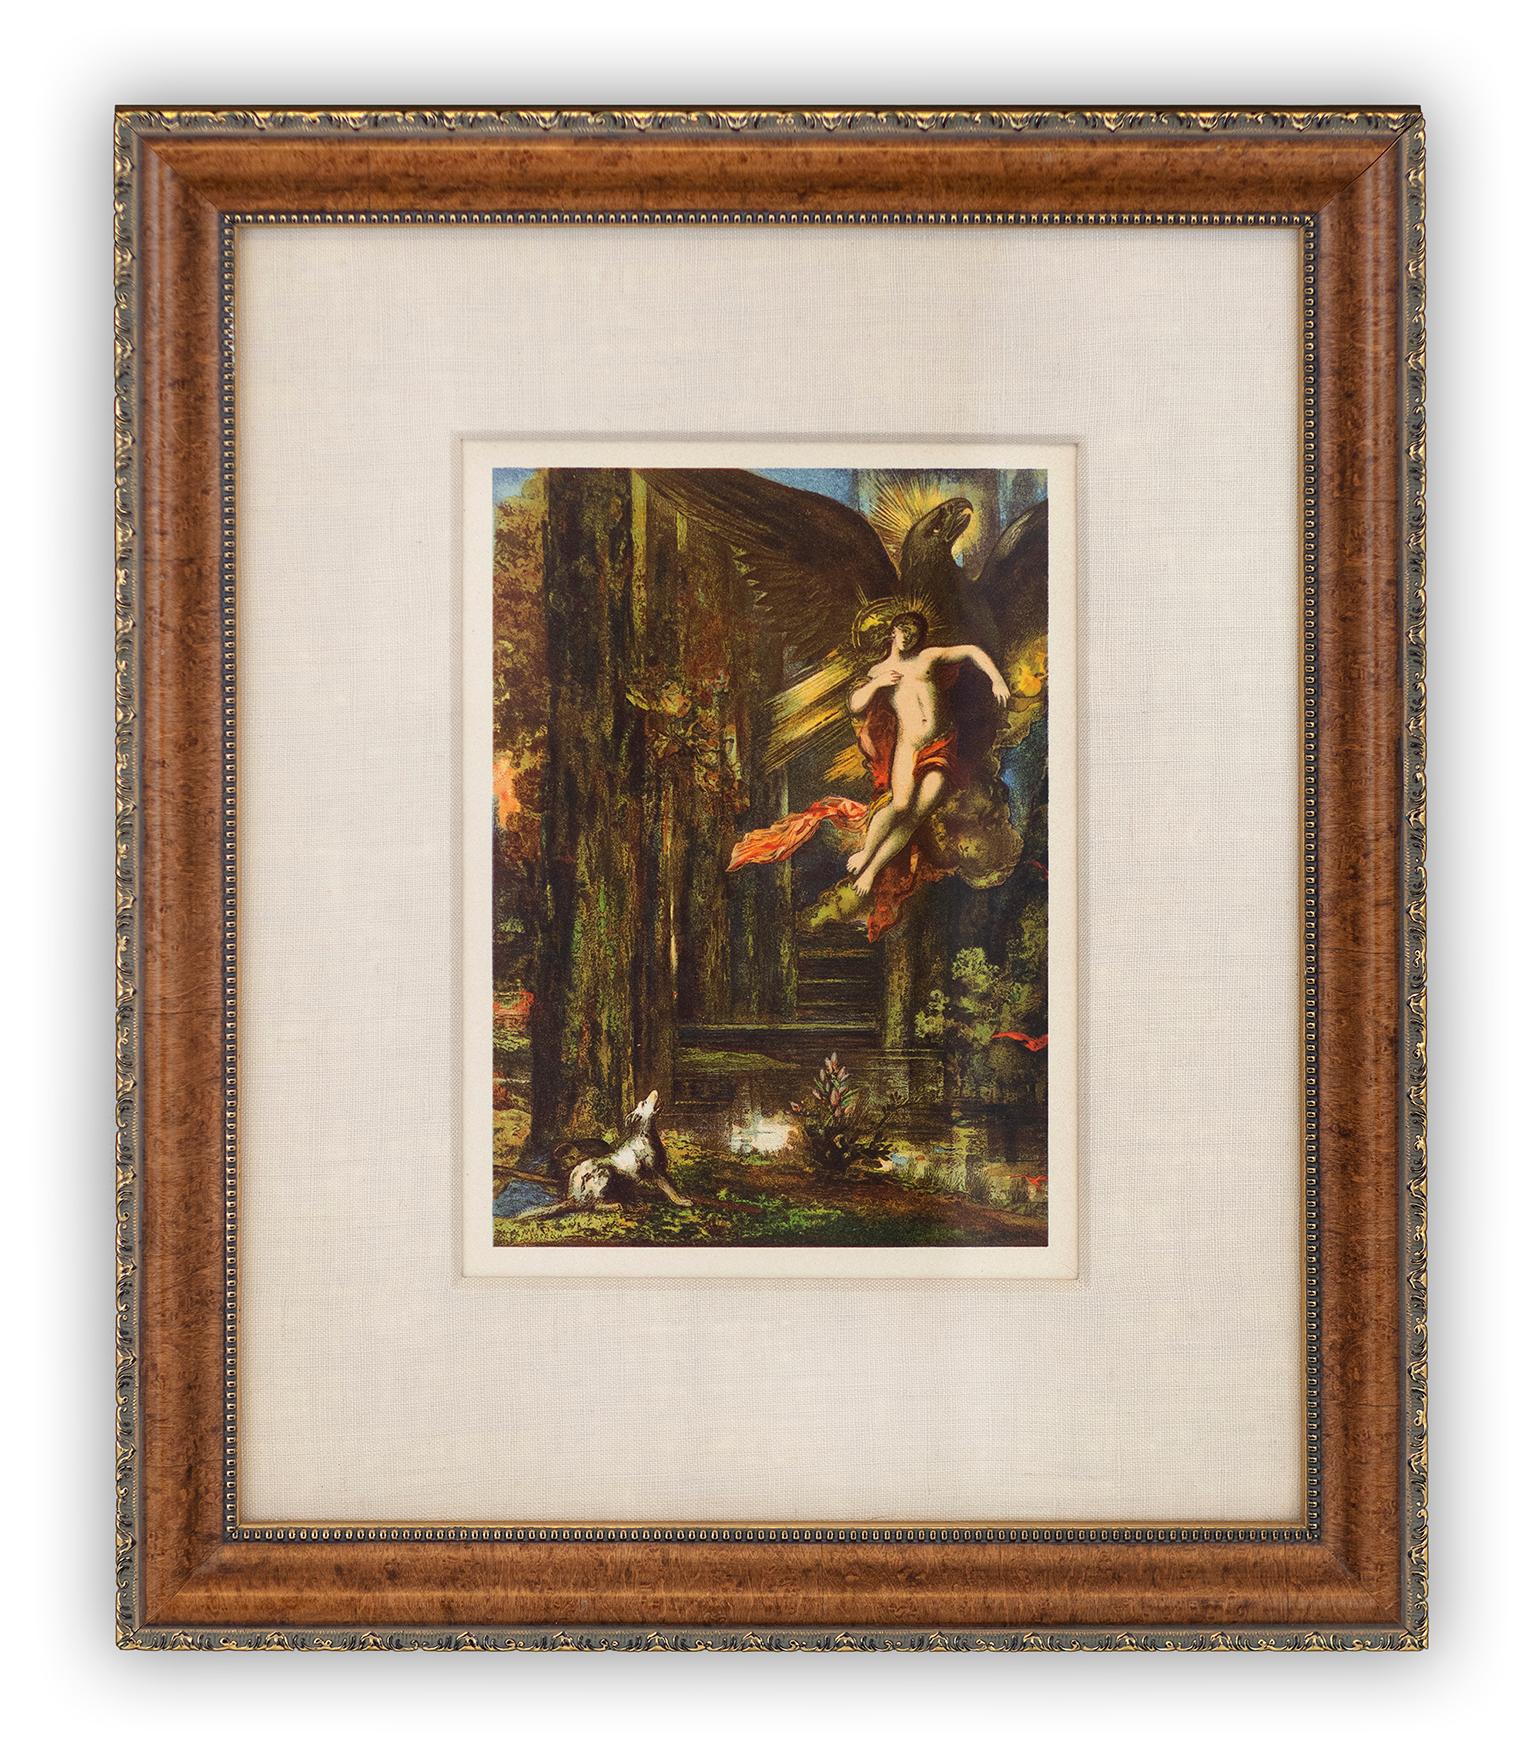 The Raising of Ganymede, Symbolist mythological lithograph, c. 1900 - Print by (After) Gustave Moreau